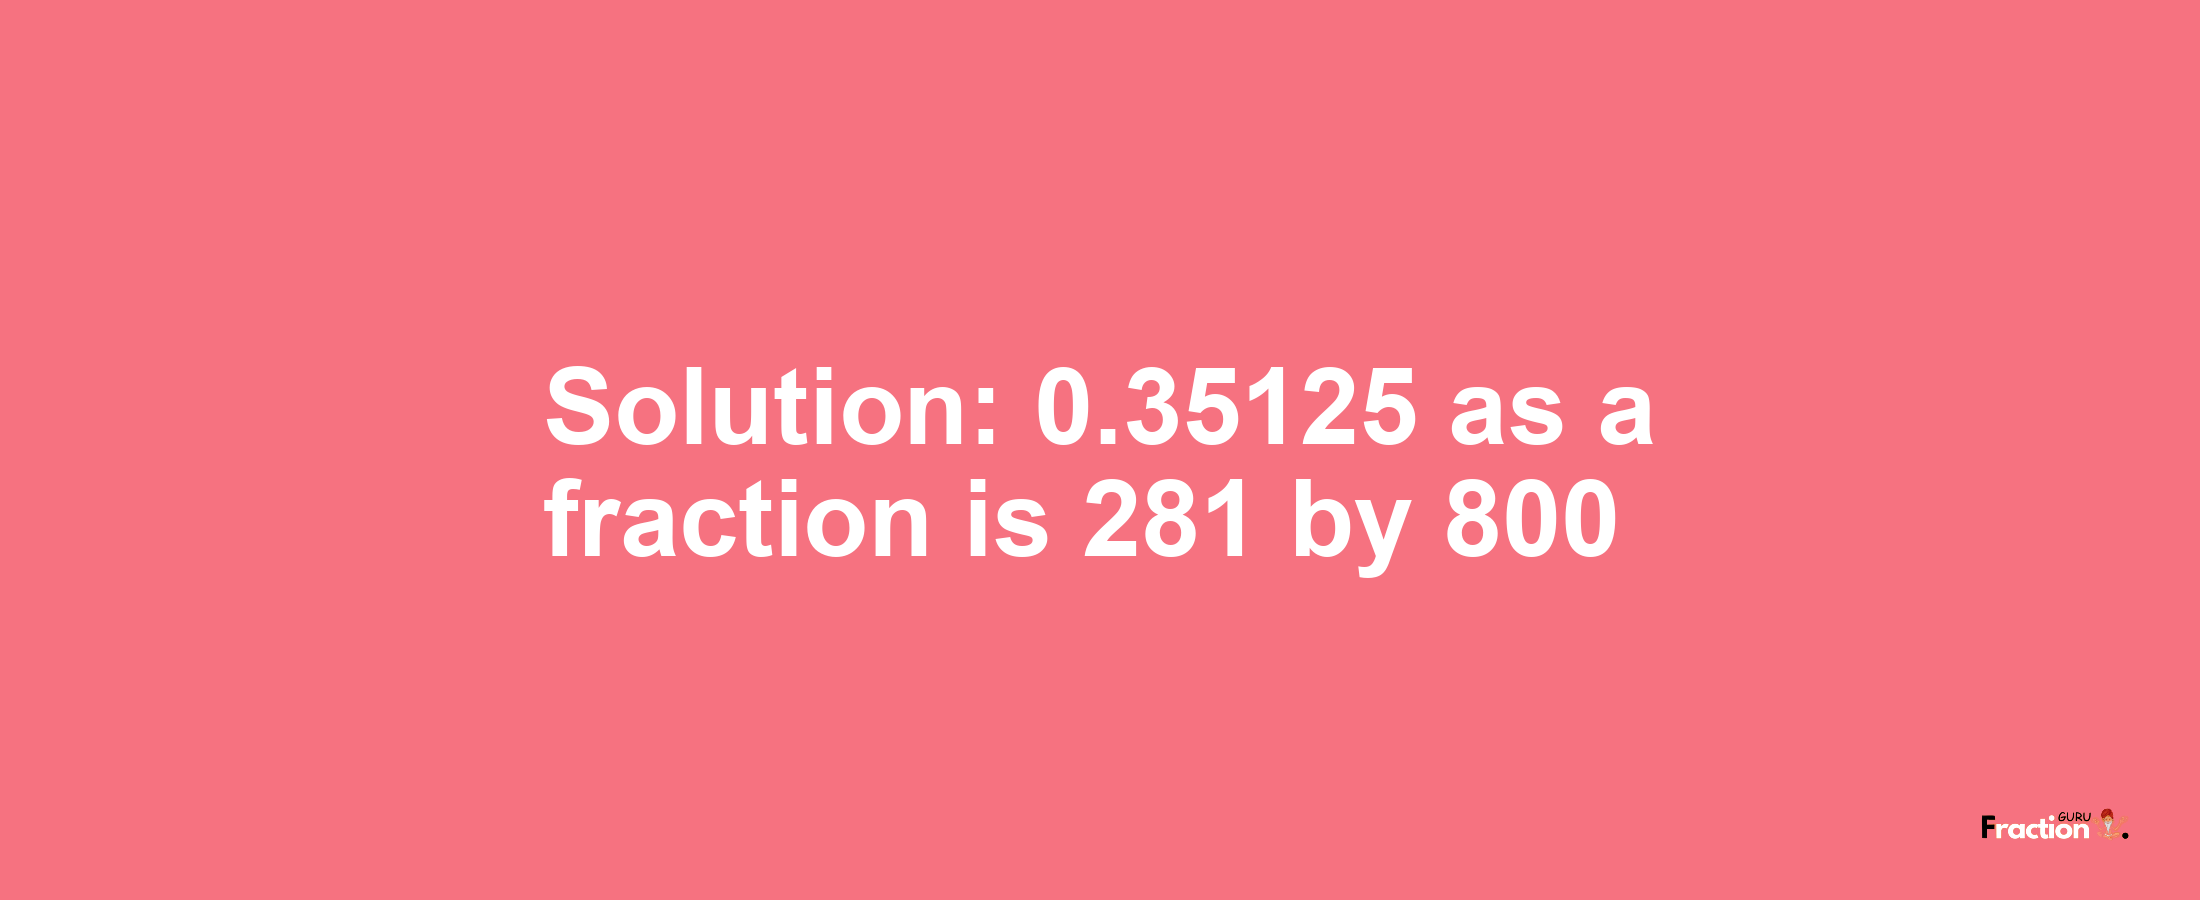 Solution:0.35125 as a fraction is 281/800